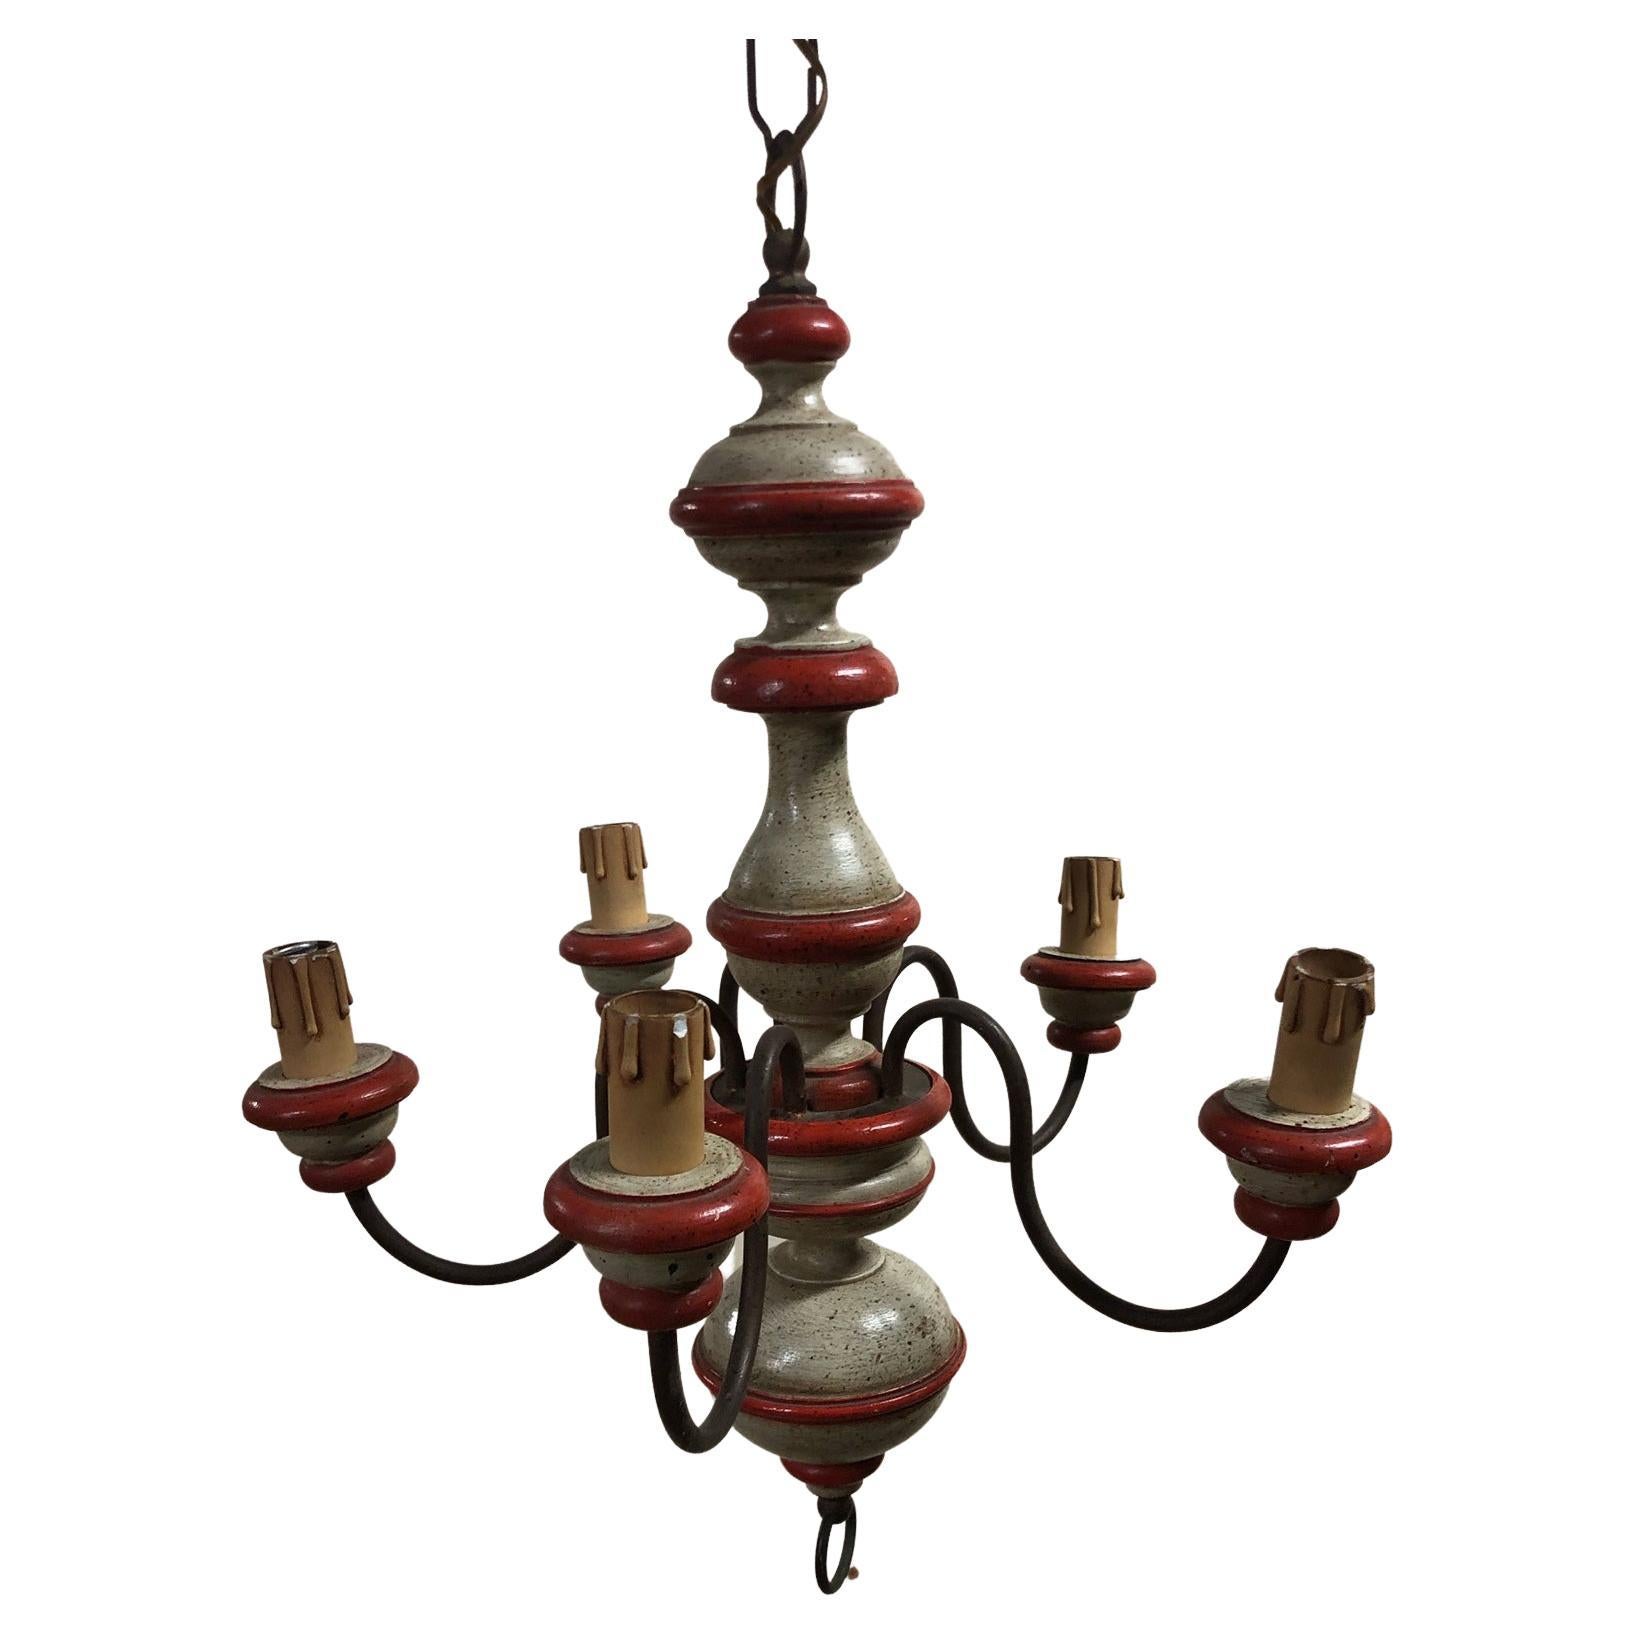 Italian Chandelier in Wood with Five Lights with Two-Tone Coloring